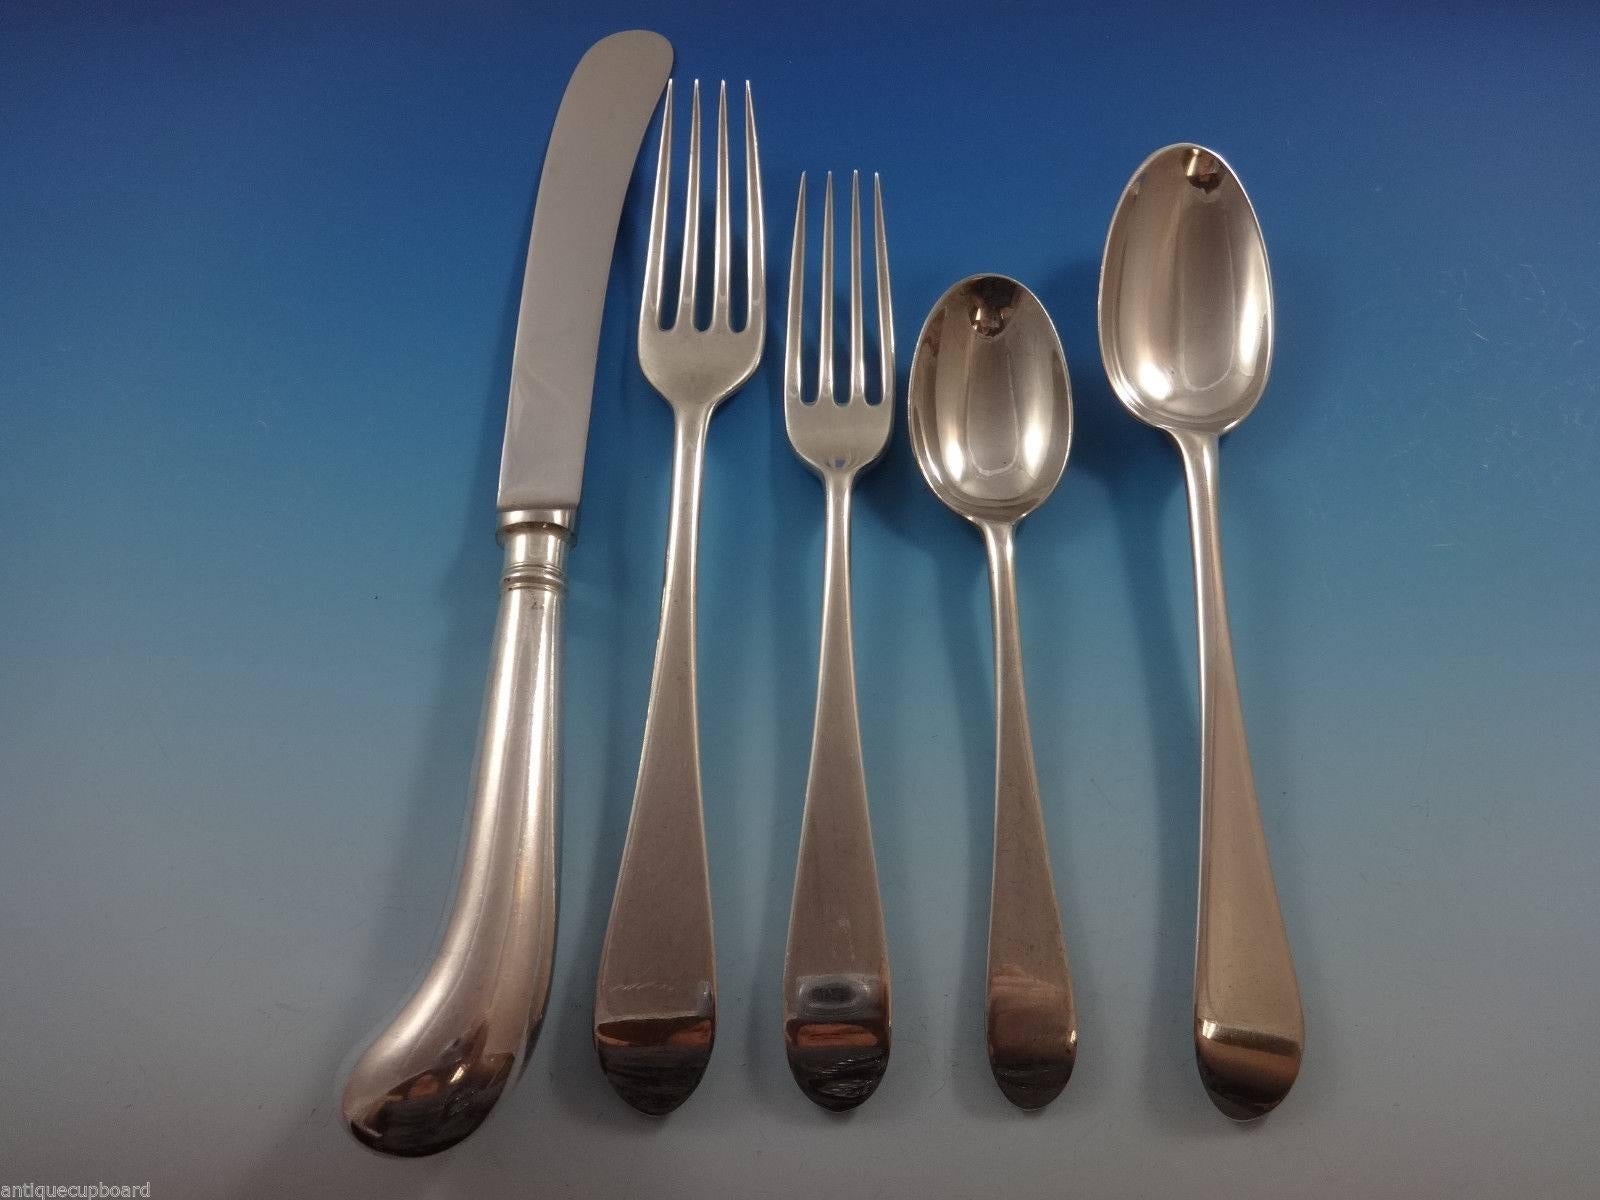 Irish Rib by James Robinson,

for 70 years, James Robinson has been selling exquisite handmade sterling silver flatware in Sheffield, England. Today, the silver is still made in the traditional way. They start with a rectangular strip of silver,